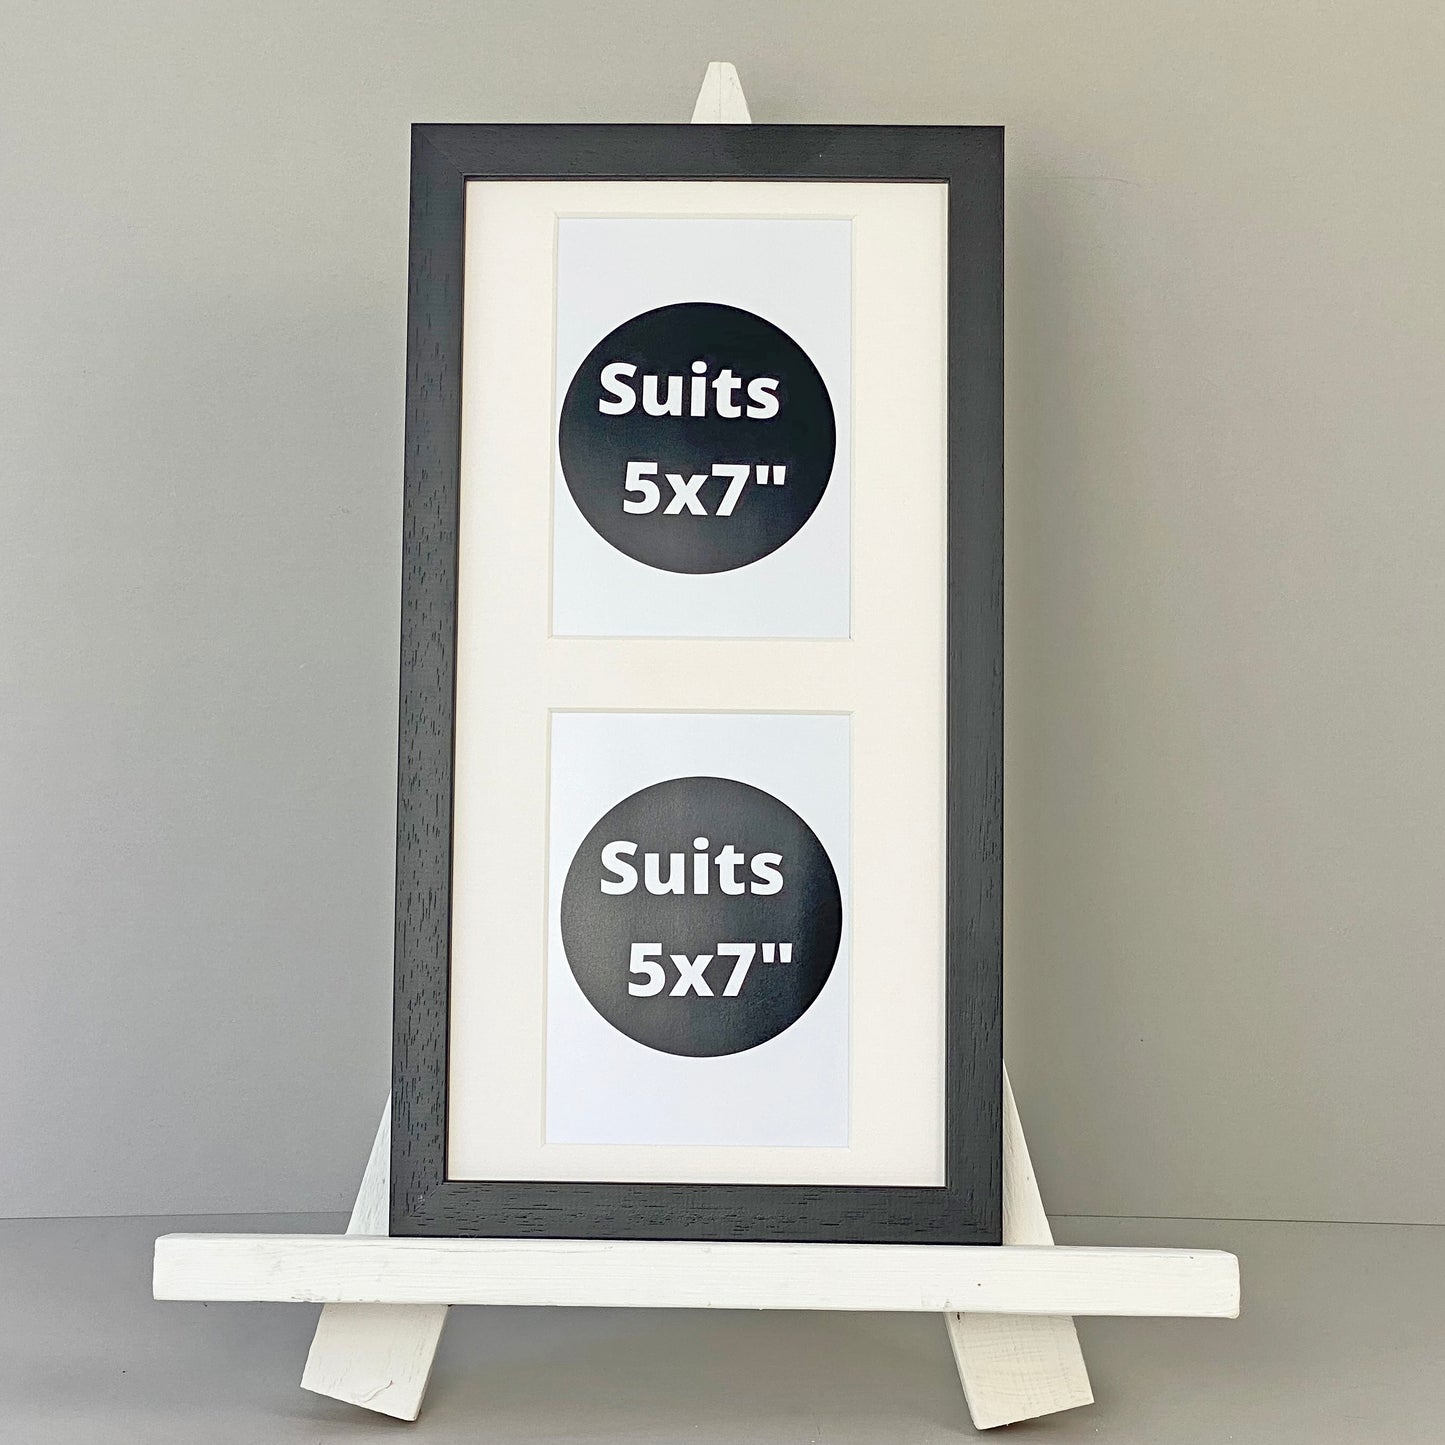 Suits two 5x7" Photos. 20x40cm. Wooden Multi Photo Frame.